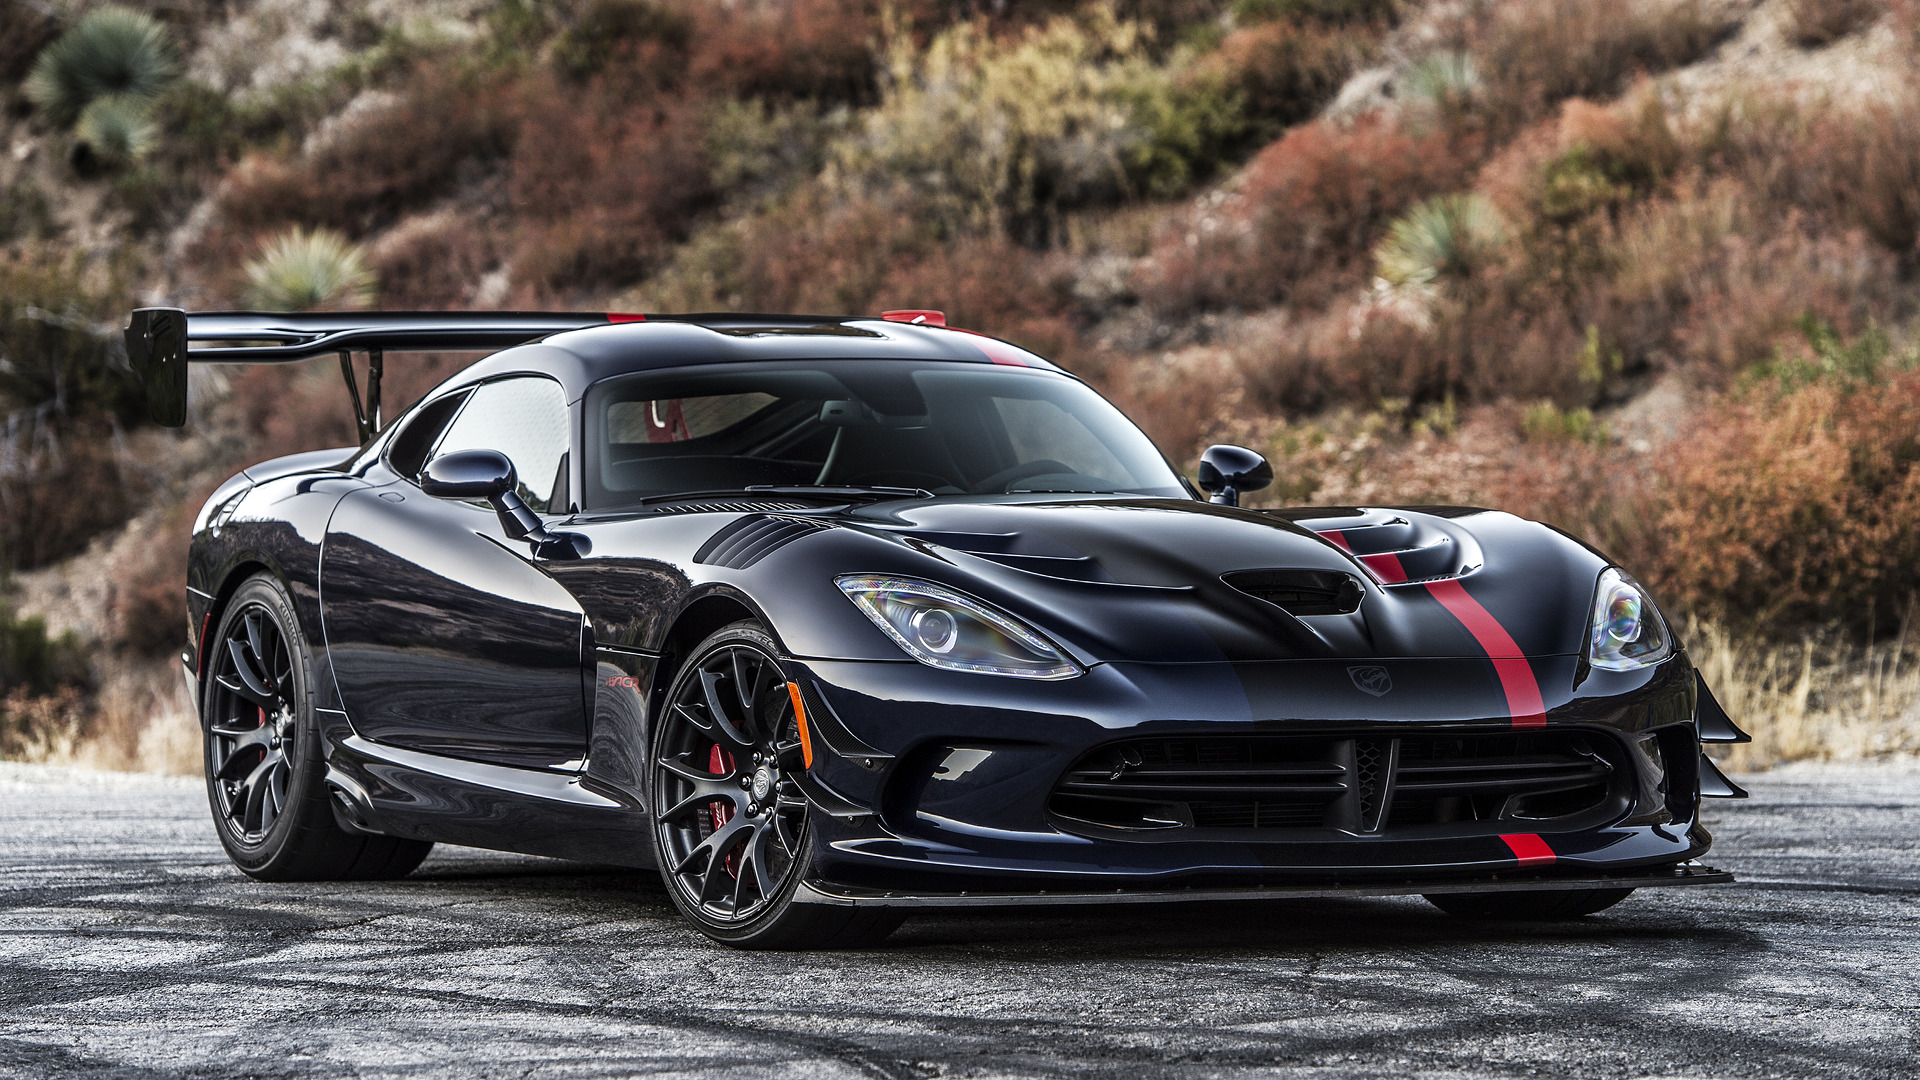 Final call for 2017 Dodge Viper orders